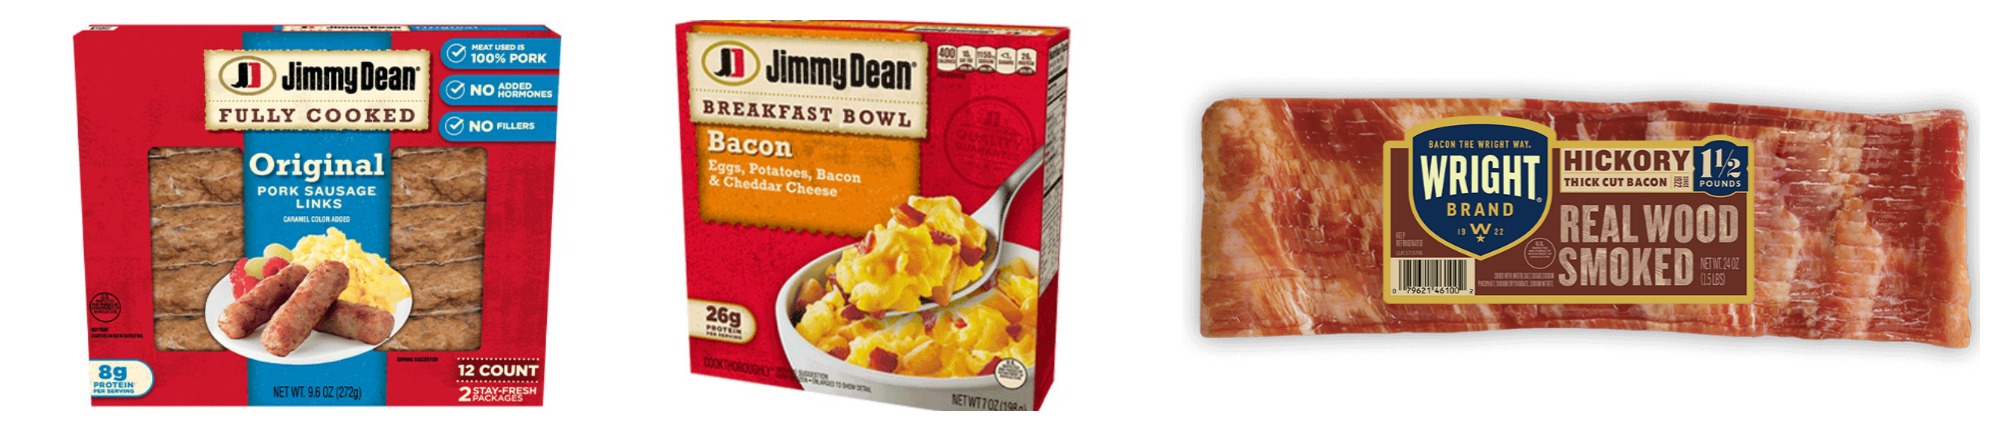 Jimmy Dean & Wright Brand Have Your Breakfast Needs Covered! on I Heart Publix 4